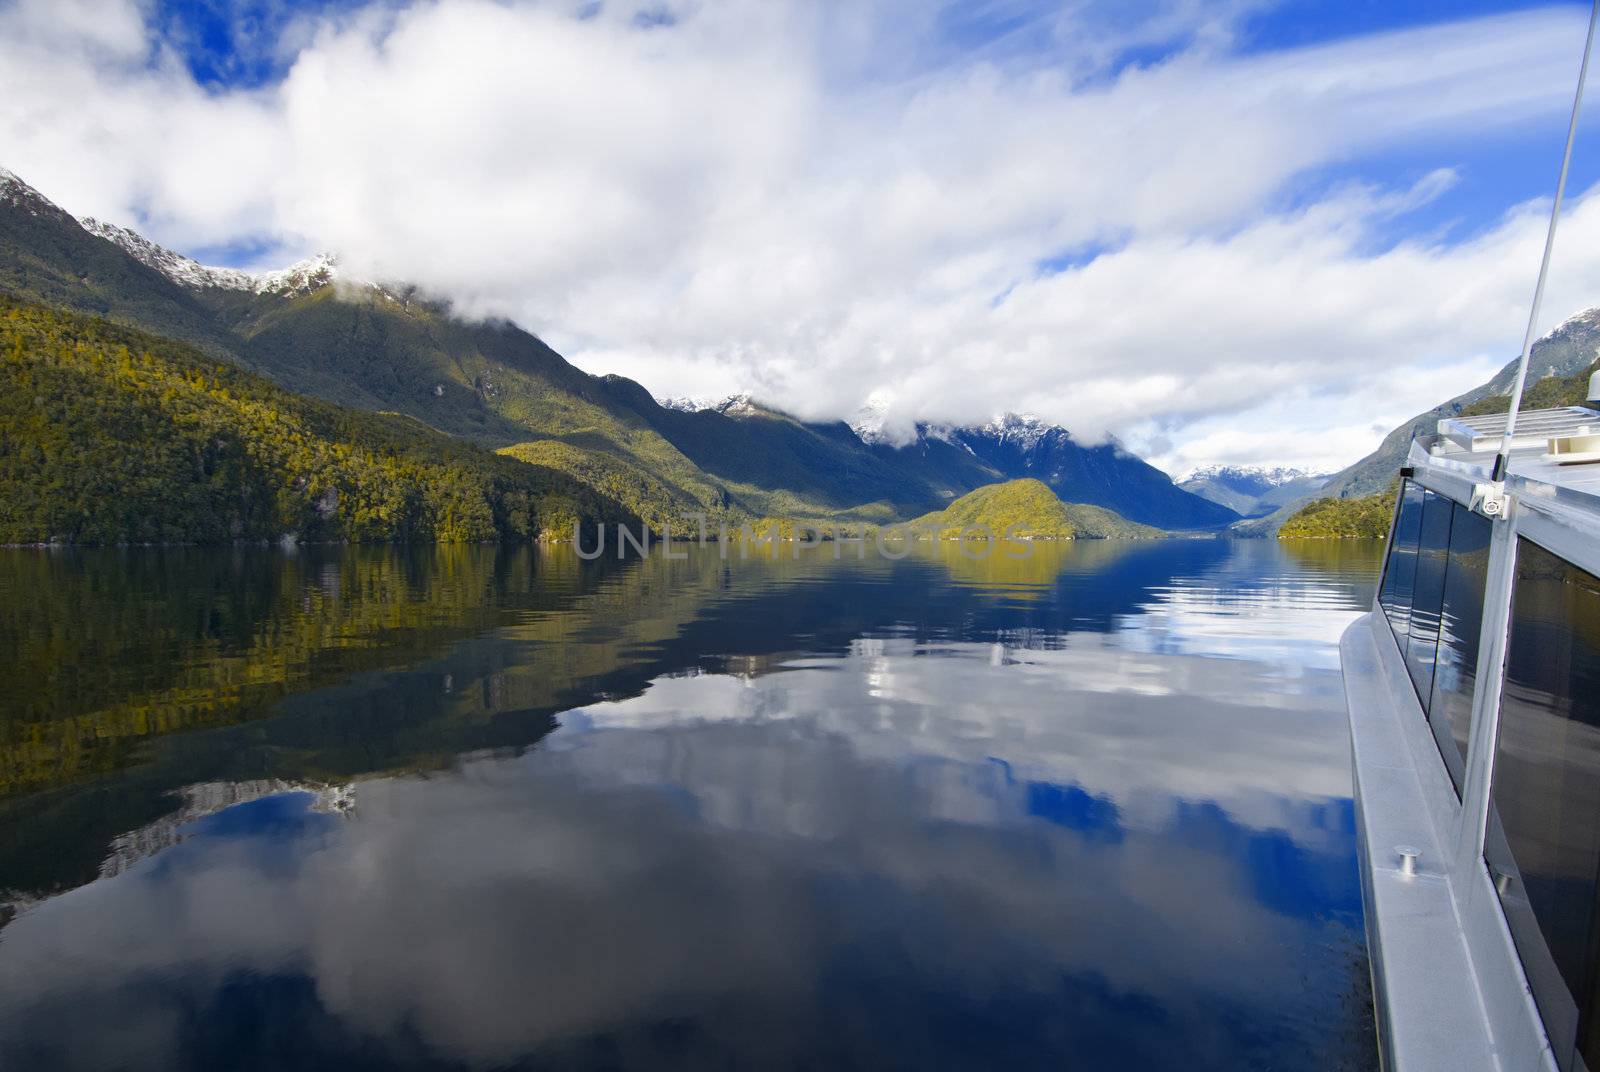 Boat Journey across Lake Manapouri in New Zealand.